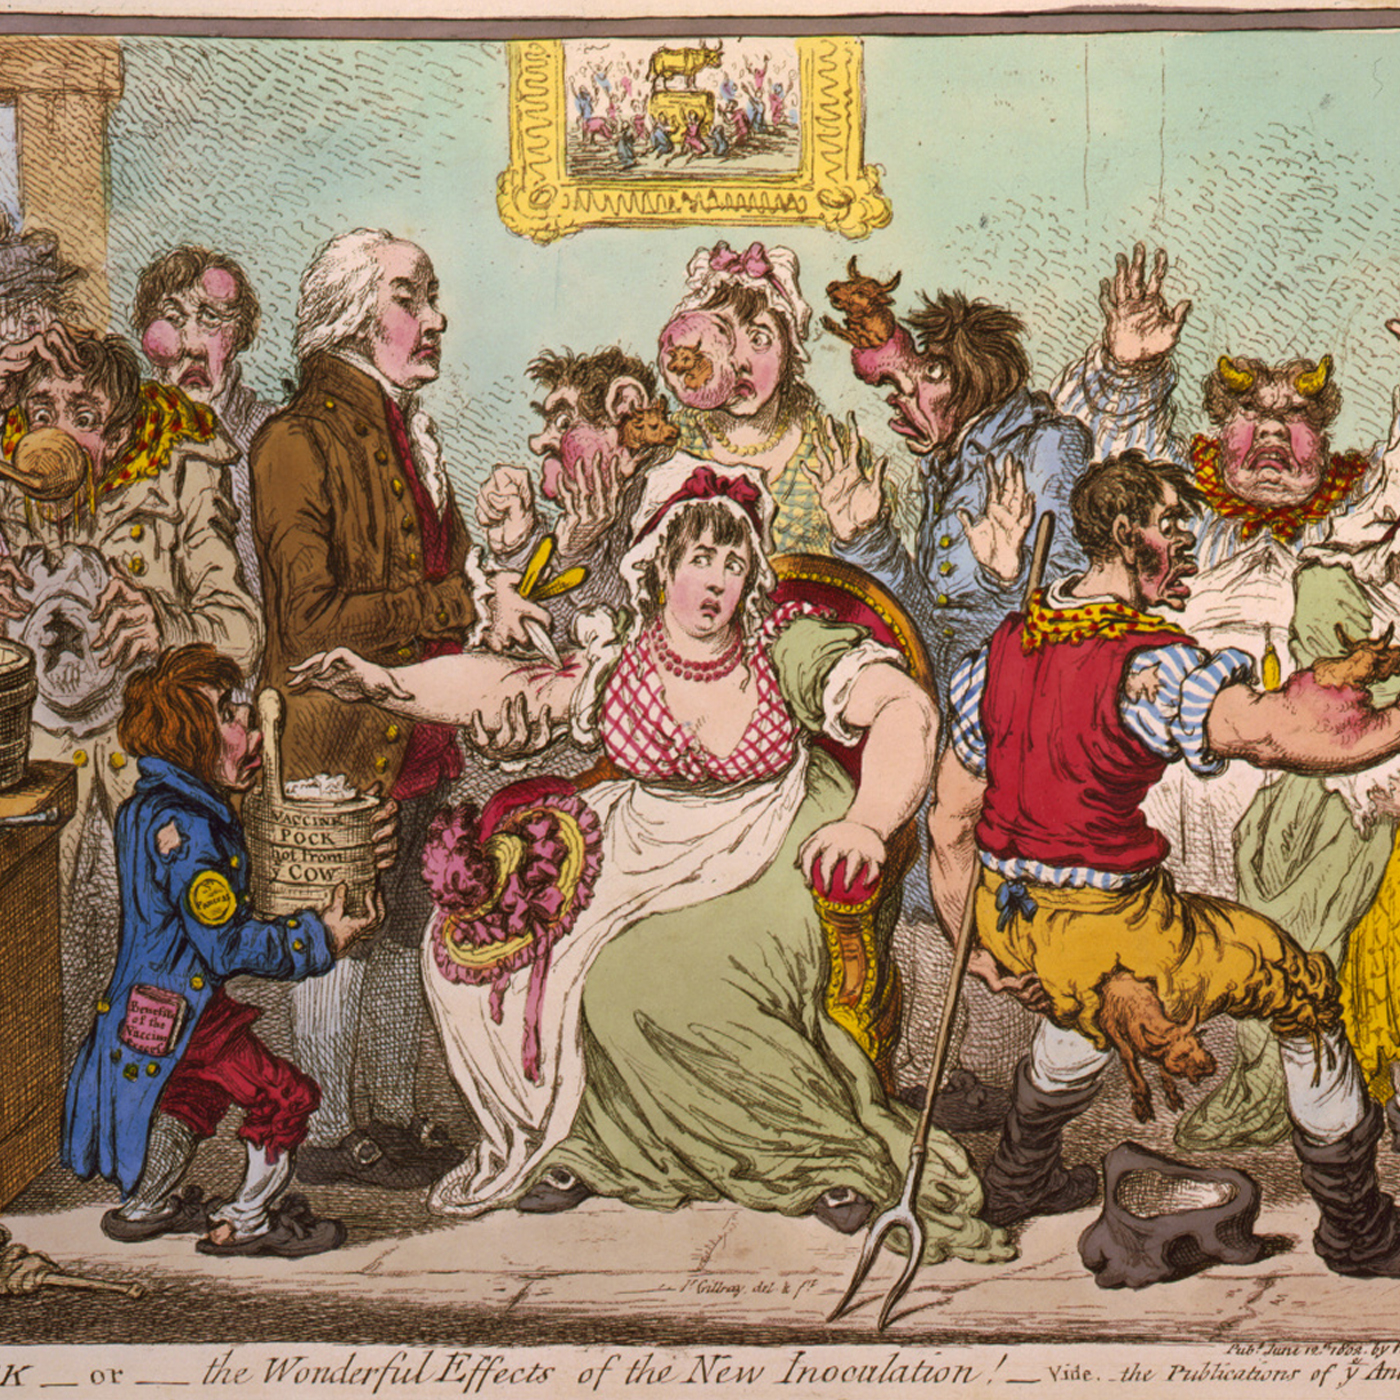 18th century editorial illustration of people with diseases